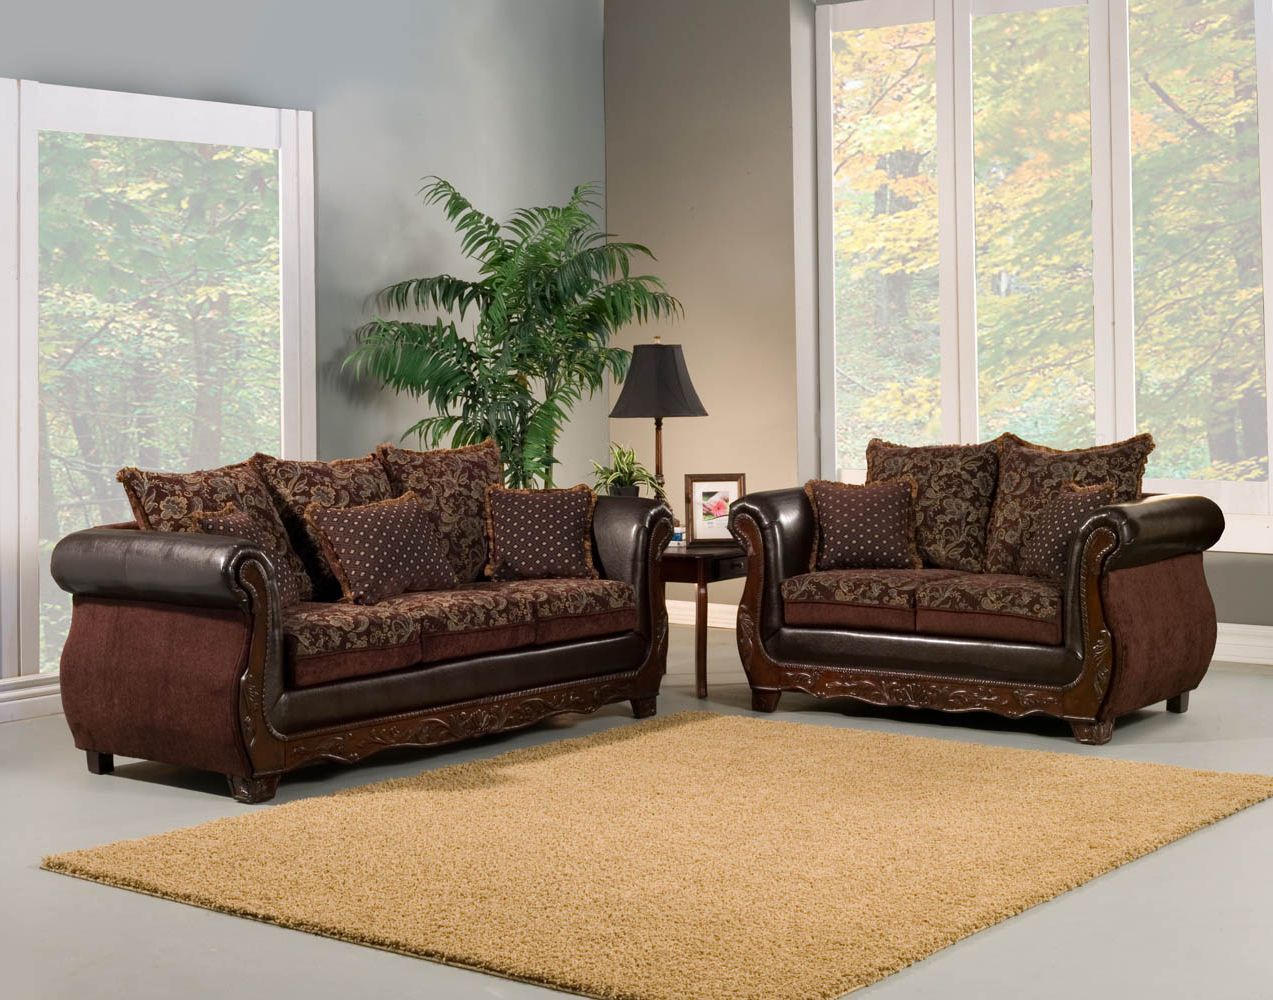 2 Piece Brown Traditional Sofa Set Regarding Recent 2 Piece Round Console Tables Set (View 2 of 10)